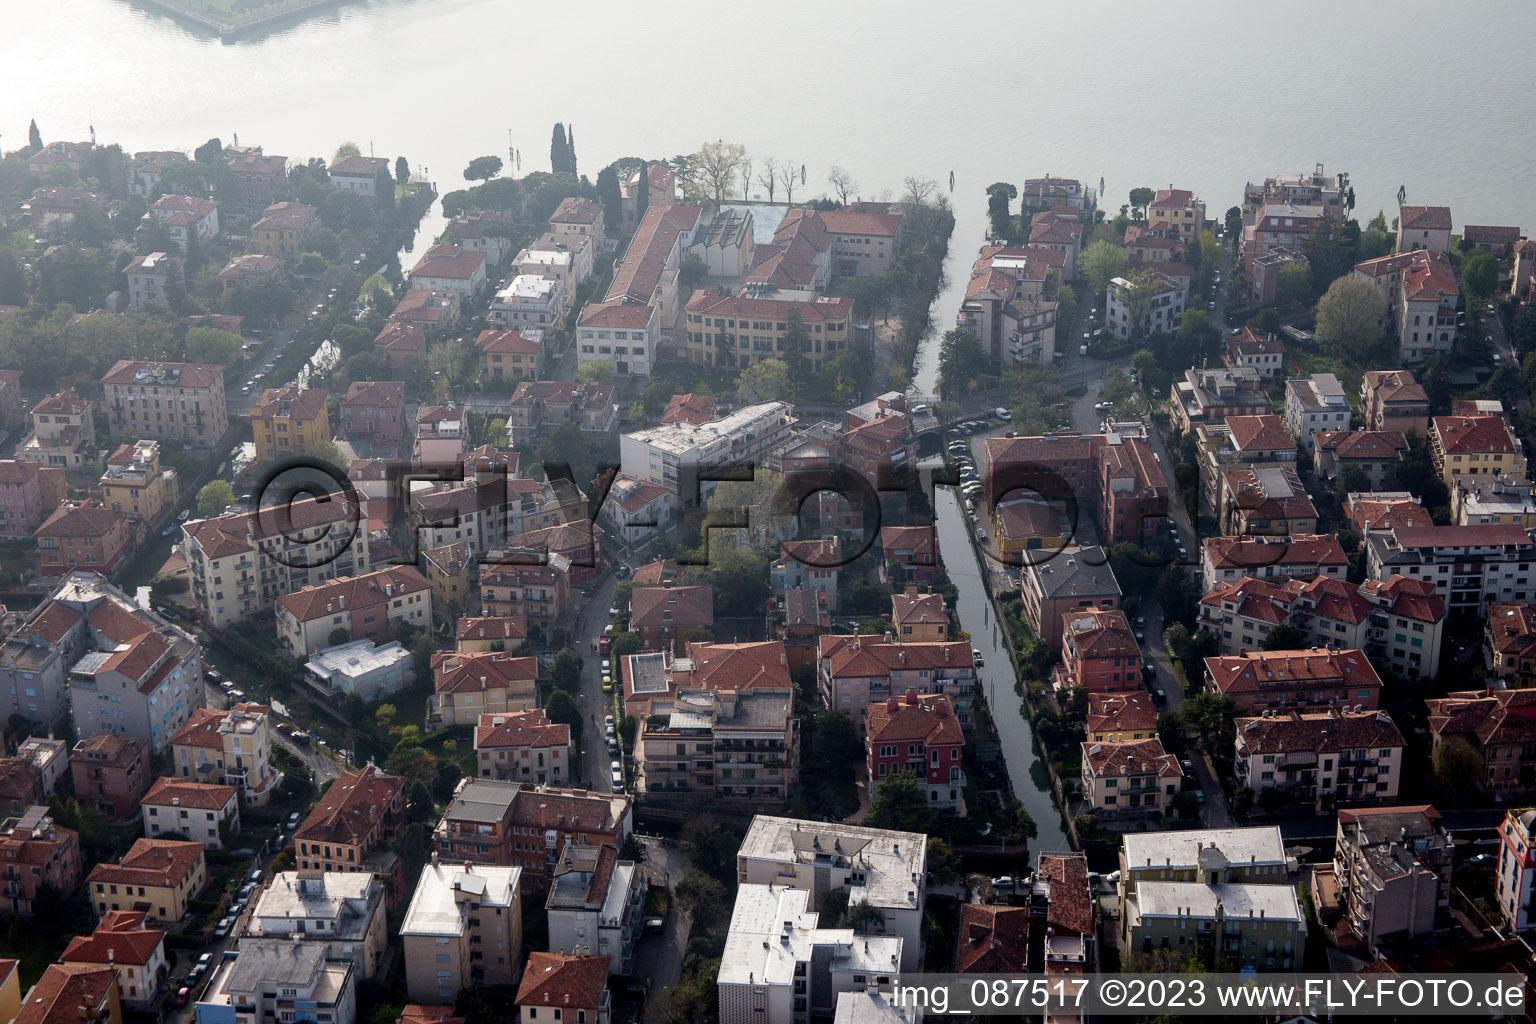 Venezia in the state Veneto, Italy seen from above